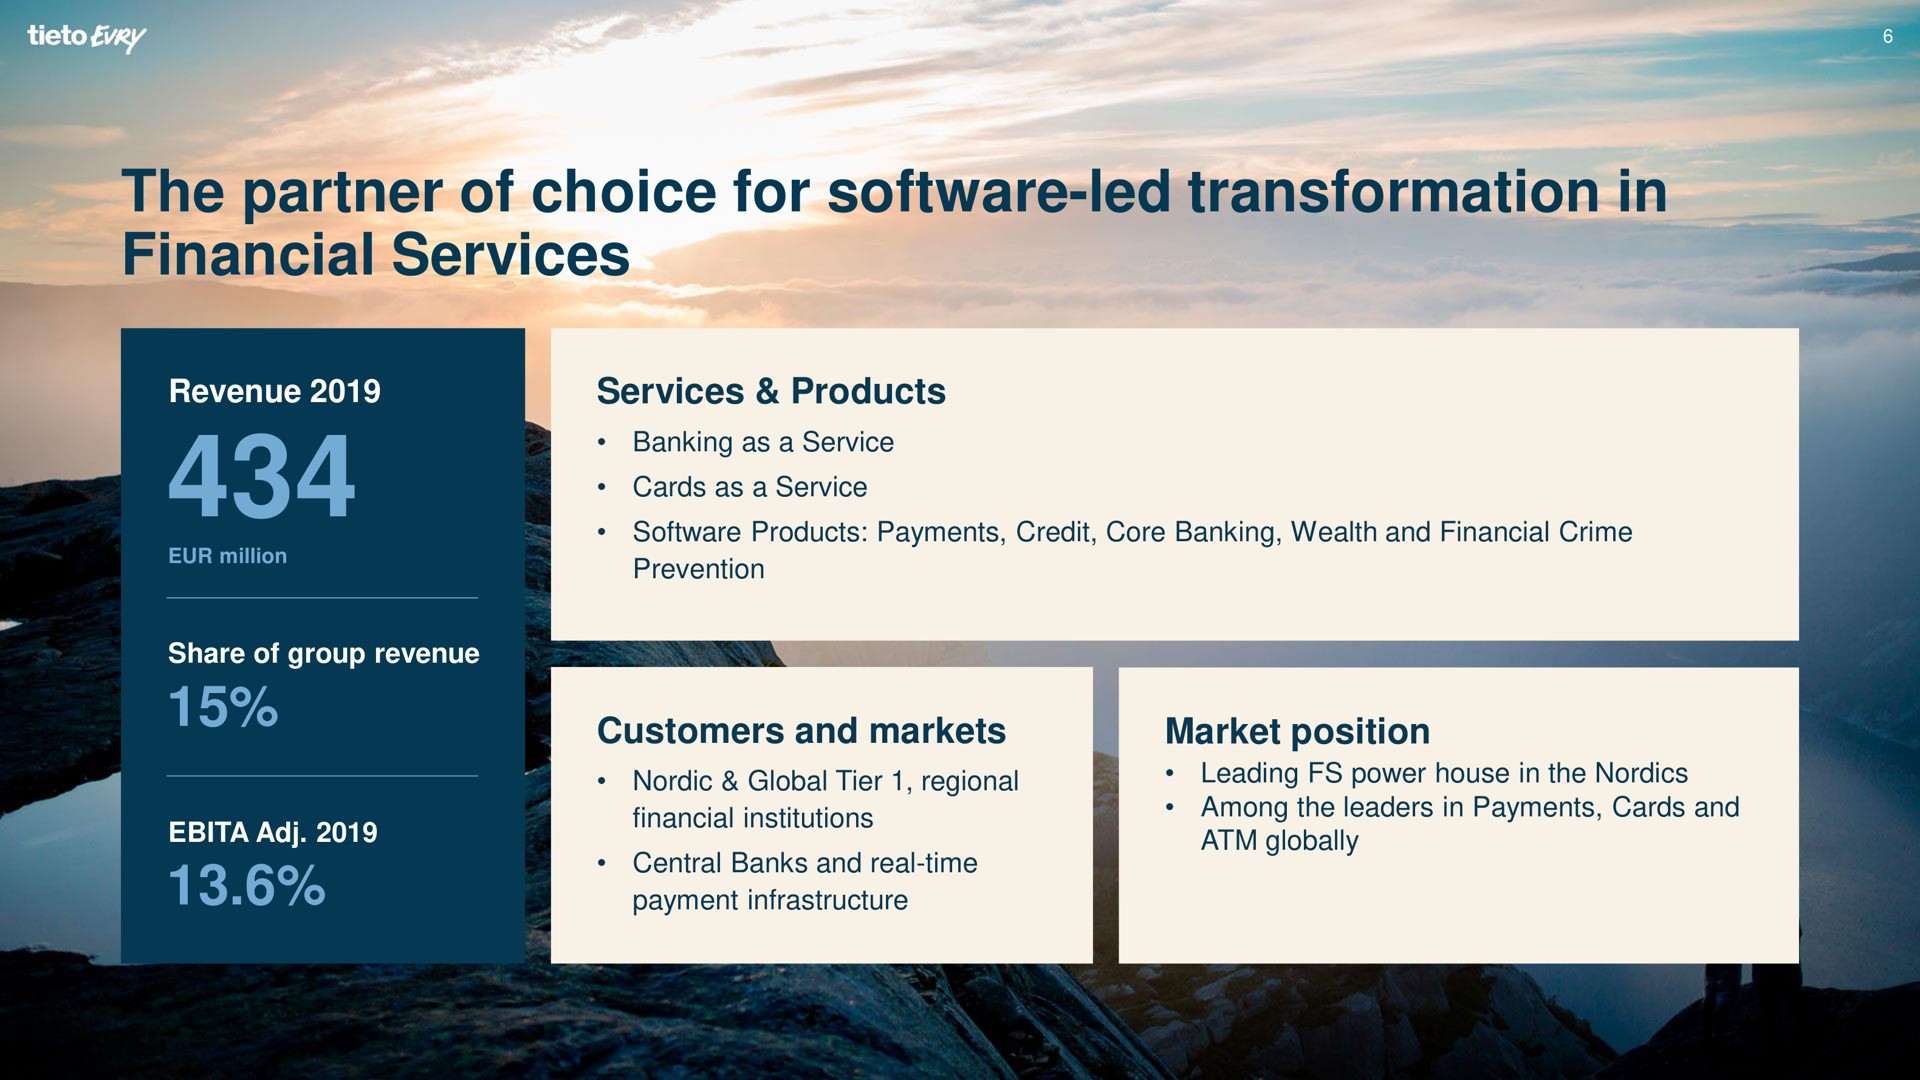 the partner of choice for led transformation in financial services | Tietoevry